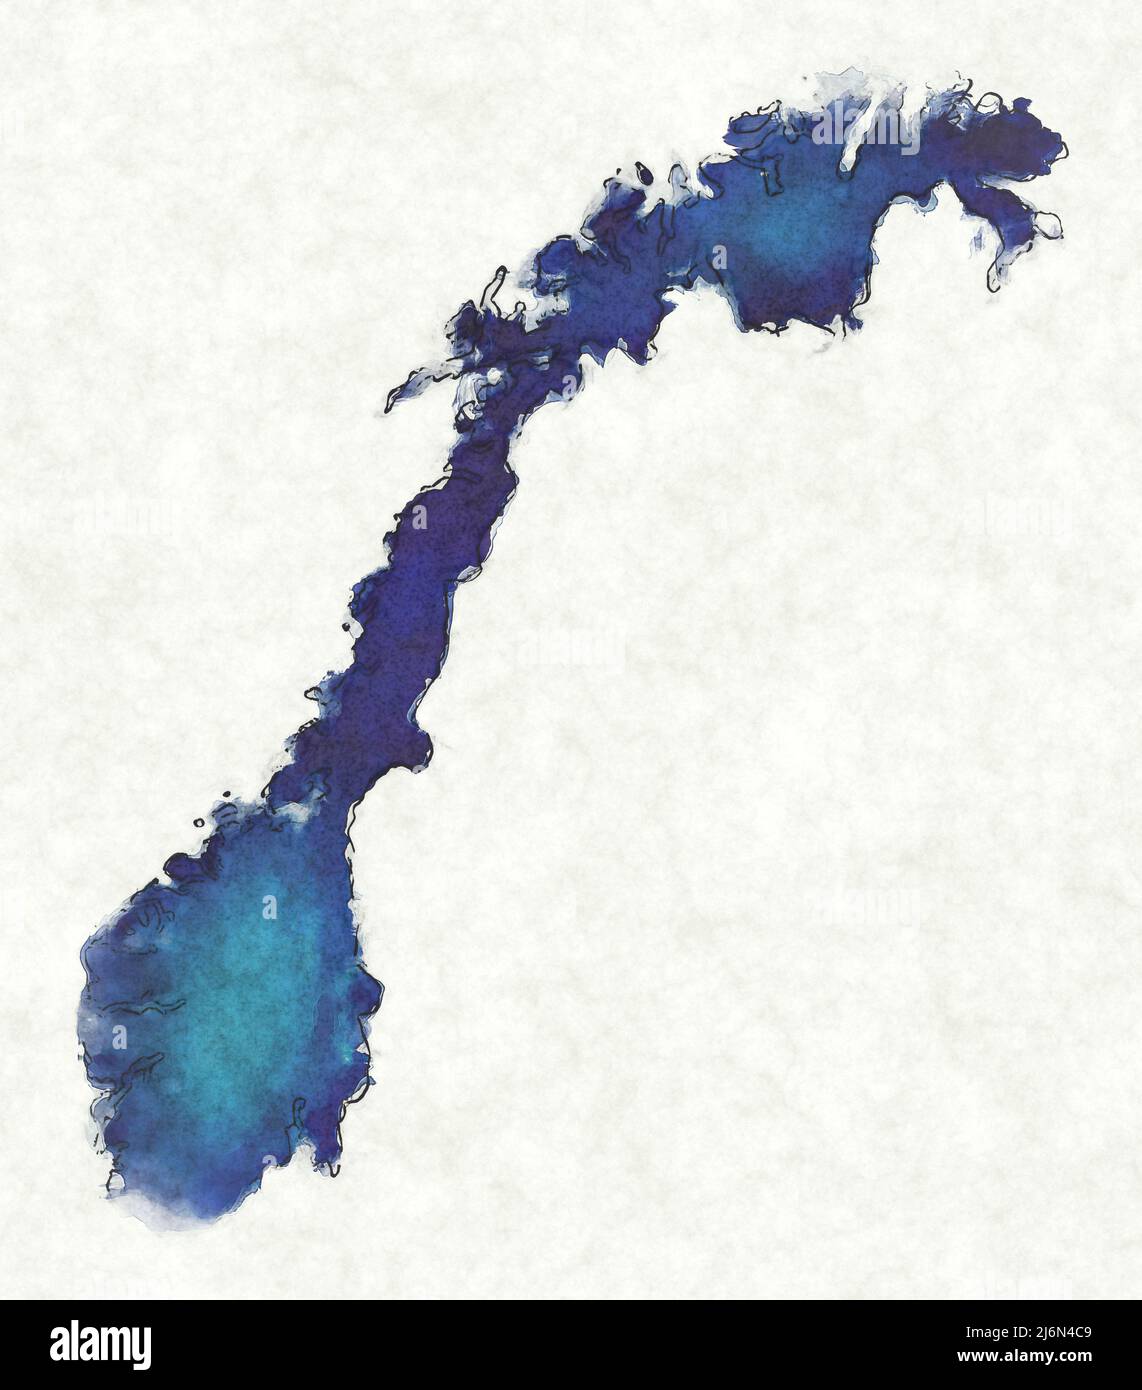 Norway map with drawn lines and blue watercolor illustration Stock Photo